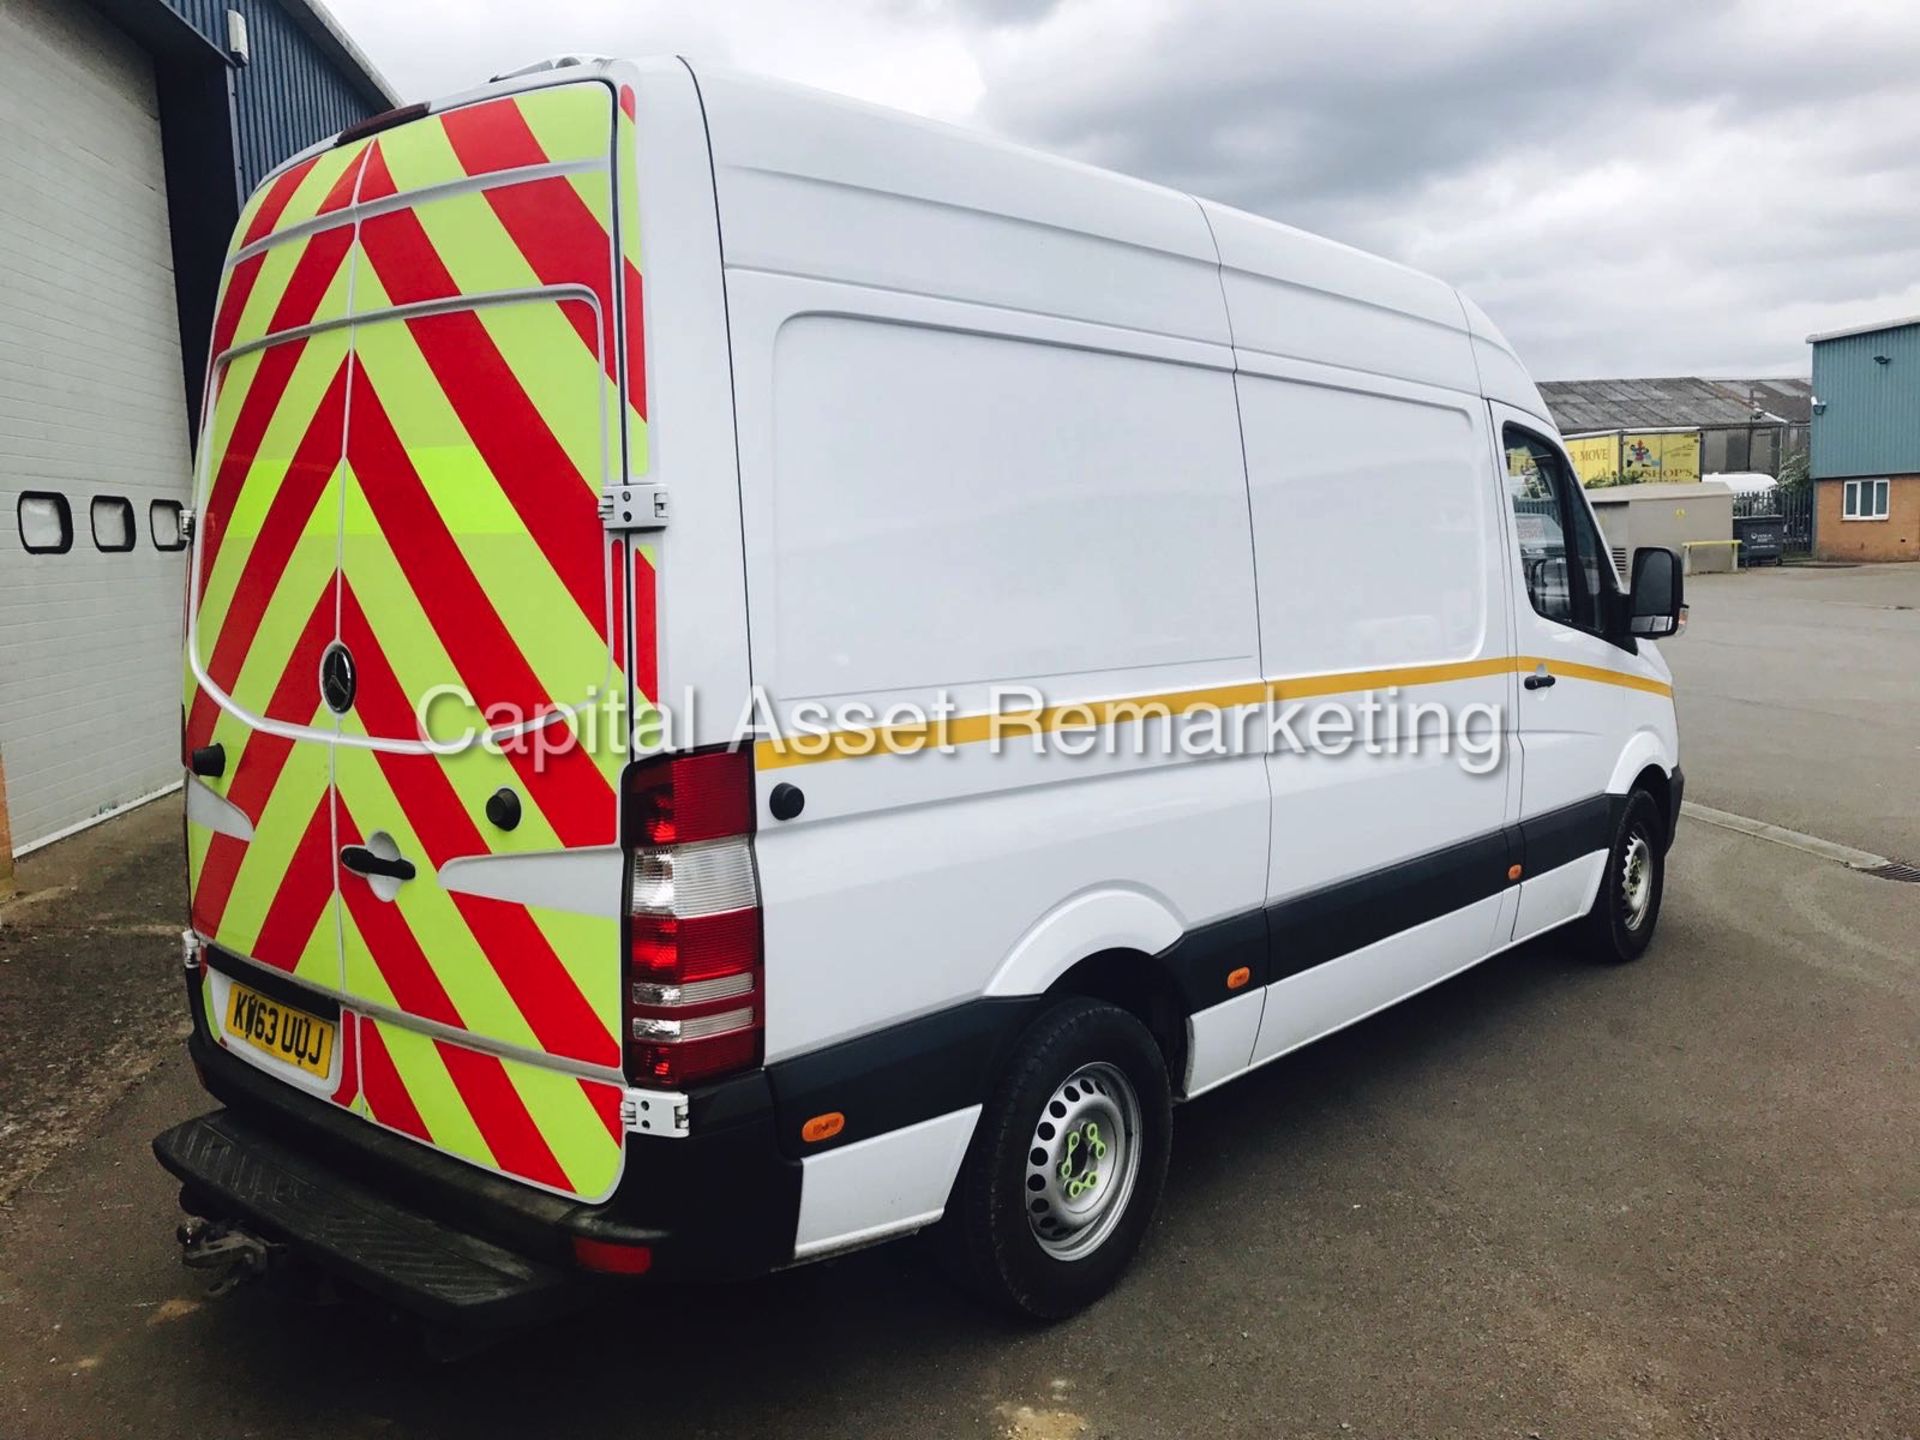 MERCEDES-BENZ SPRINTER 313 CDI 'MWB HI-ROOF' (2014) '130 BHP - 6 SPEED' ( 1 OWNER - FULL HISTORY) - Image 6 of 13